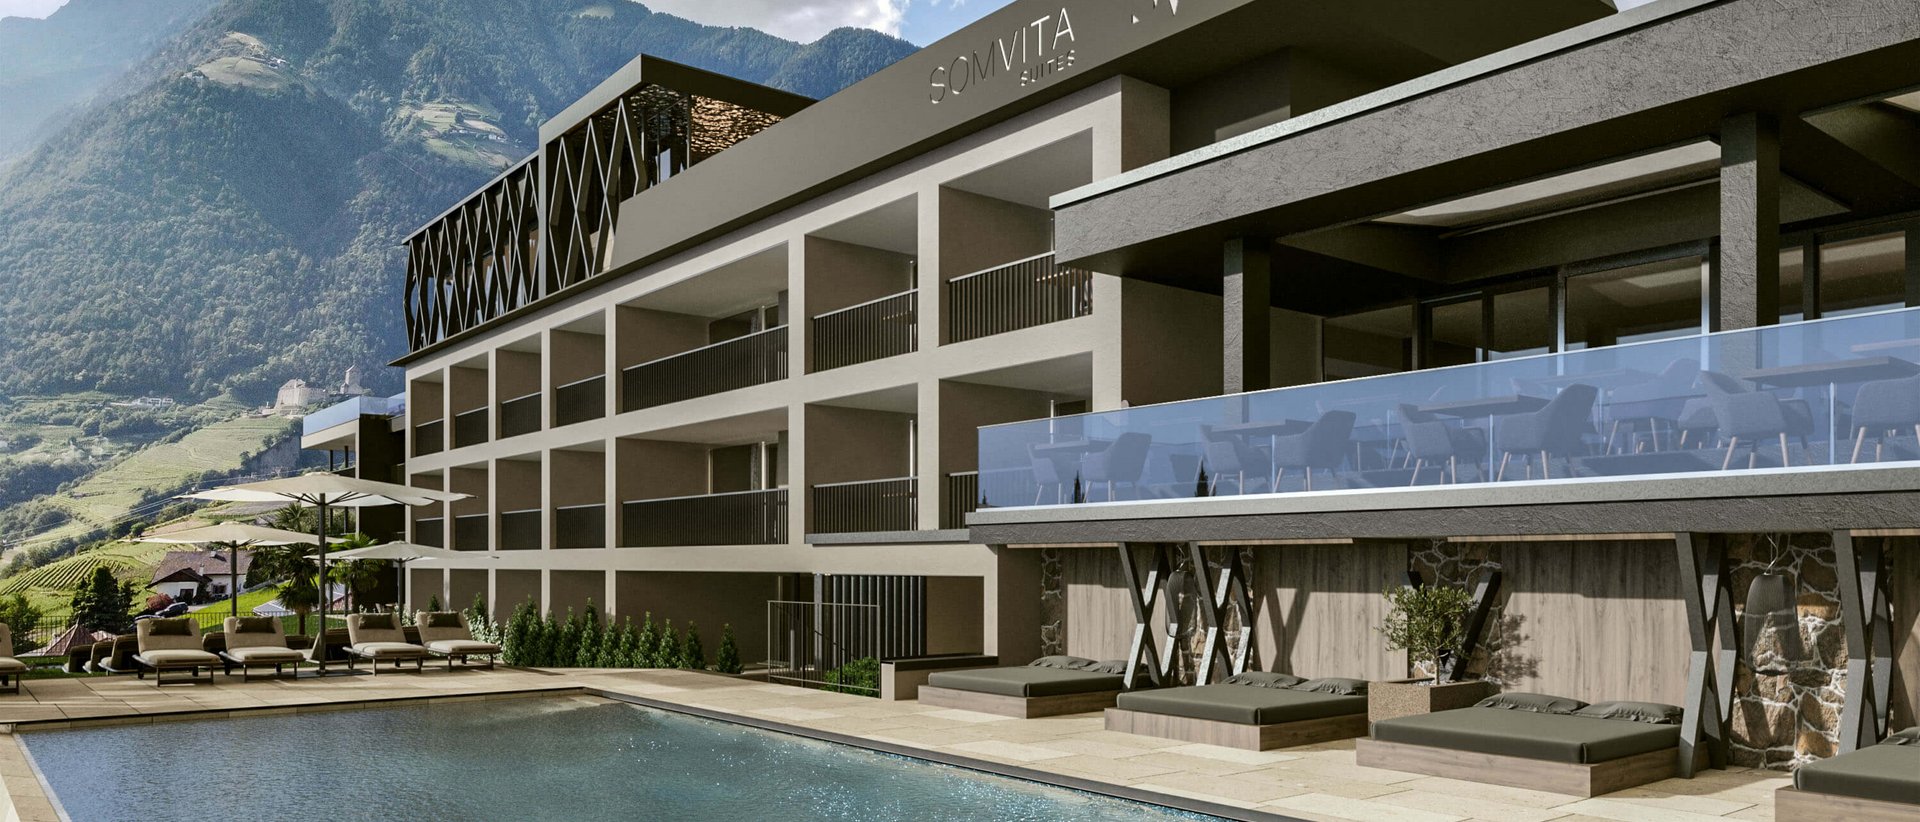 SomVita Suites and rooms at a glance